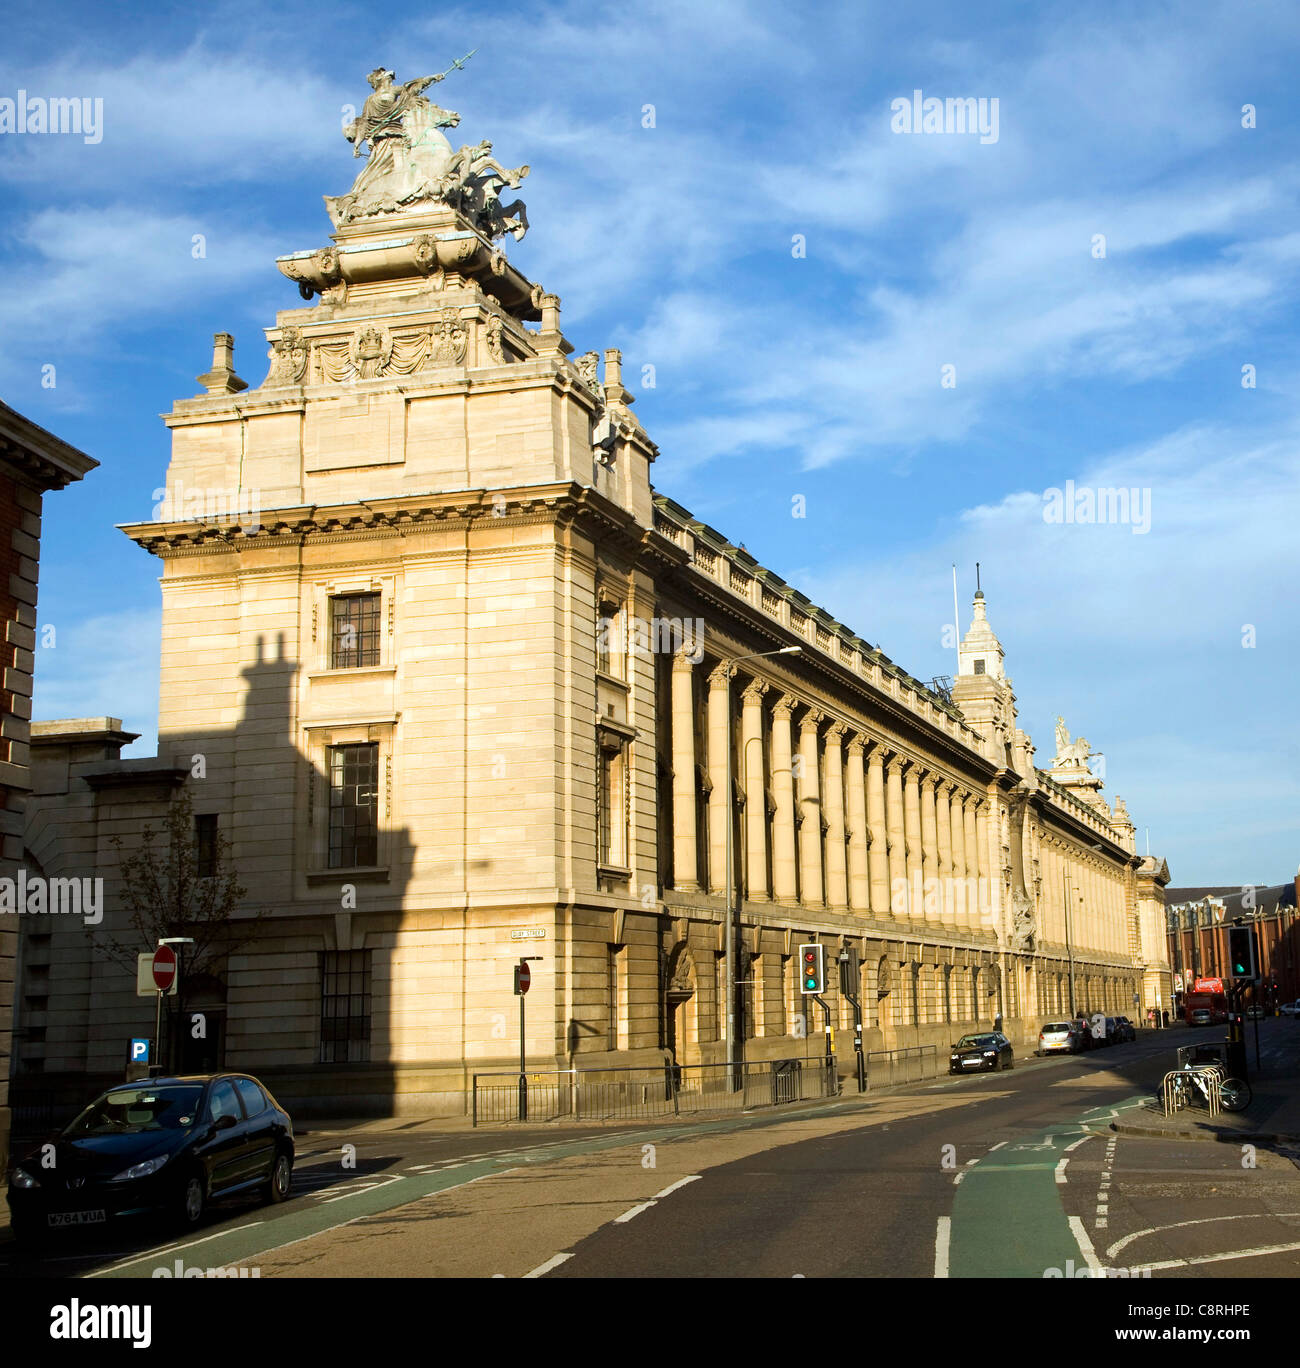 Alfred Gelder street with the Guildhall, Hull, Yorkshire, England Stock Photo